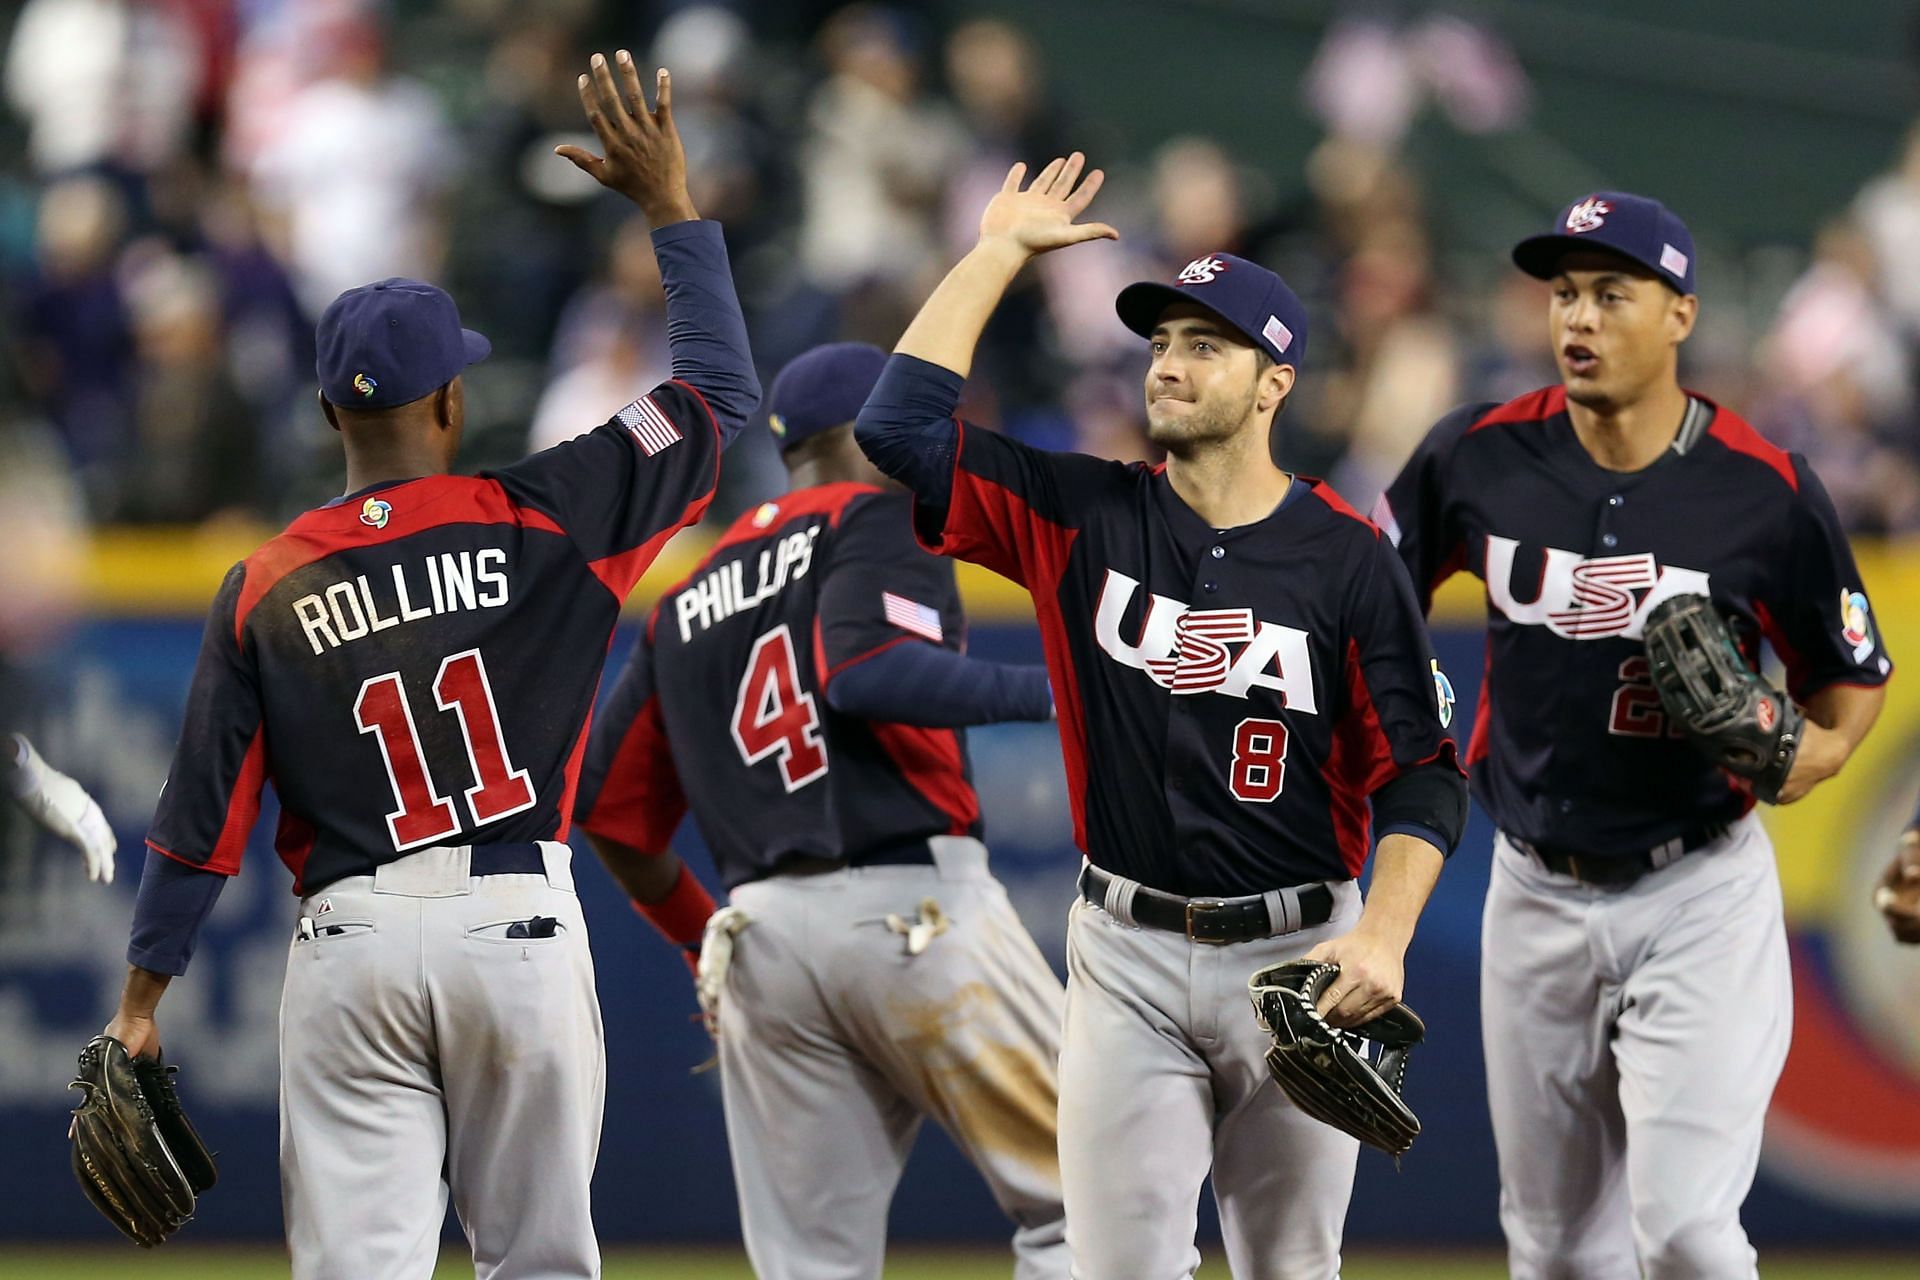 WBC Roundup: Team USA shocks Villar and the Dominican, advance to  semifinals - Brew Crew Ball